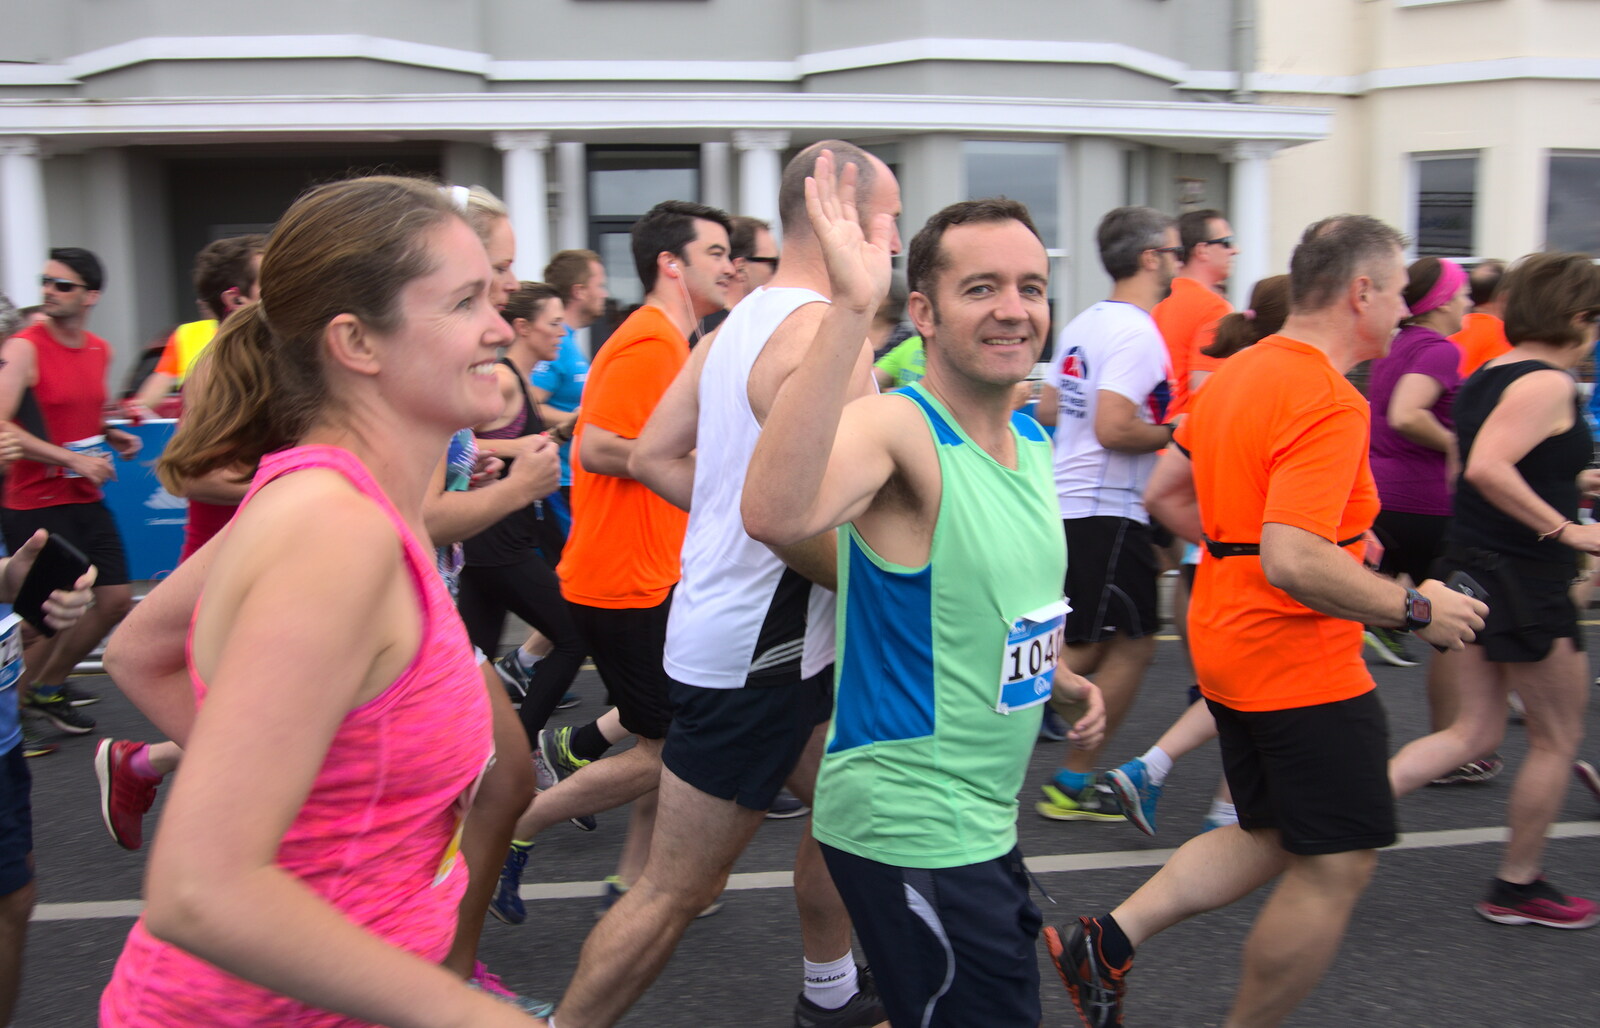 James waves to Fred and Harry as the runners pass by from The Dún Laoghaire 10k Run, County Dublin, Ireland - 6th August 2018